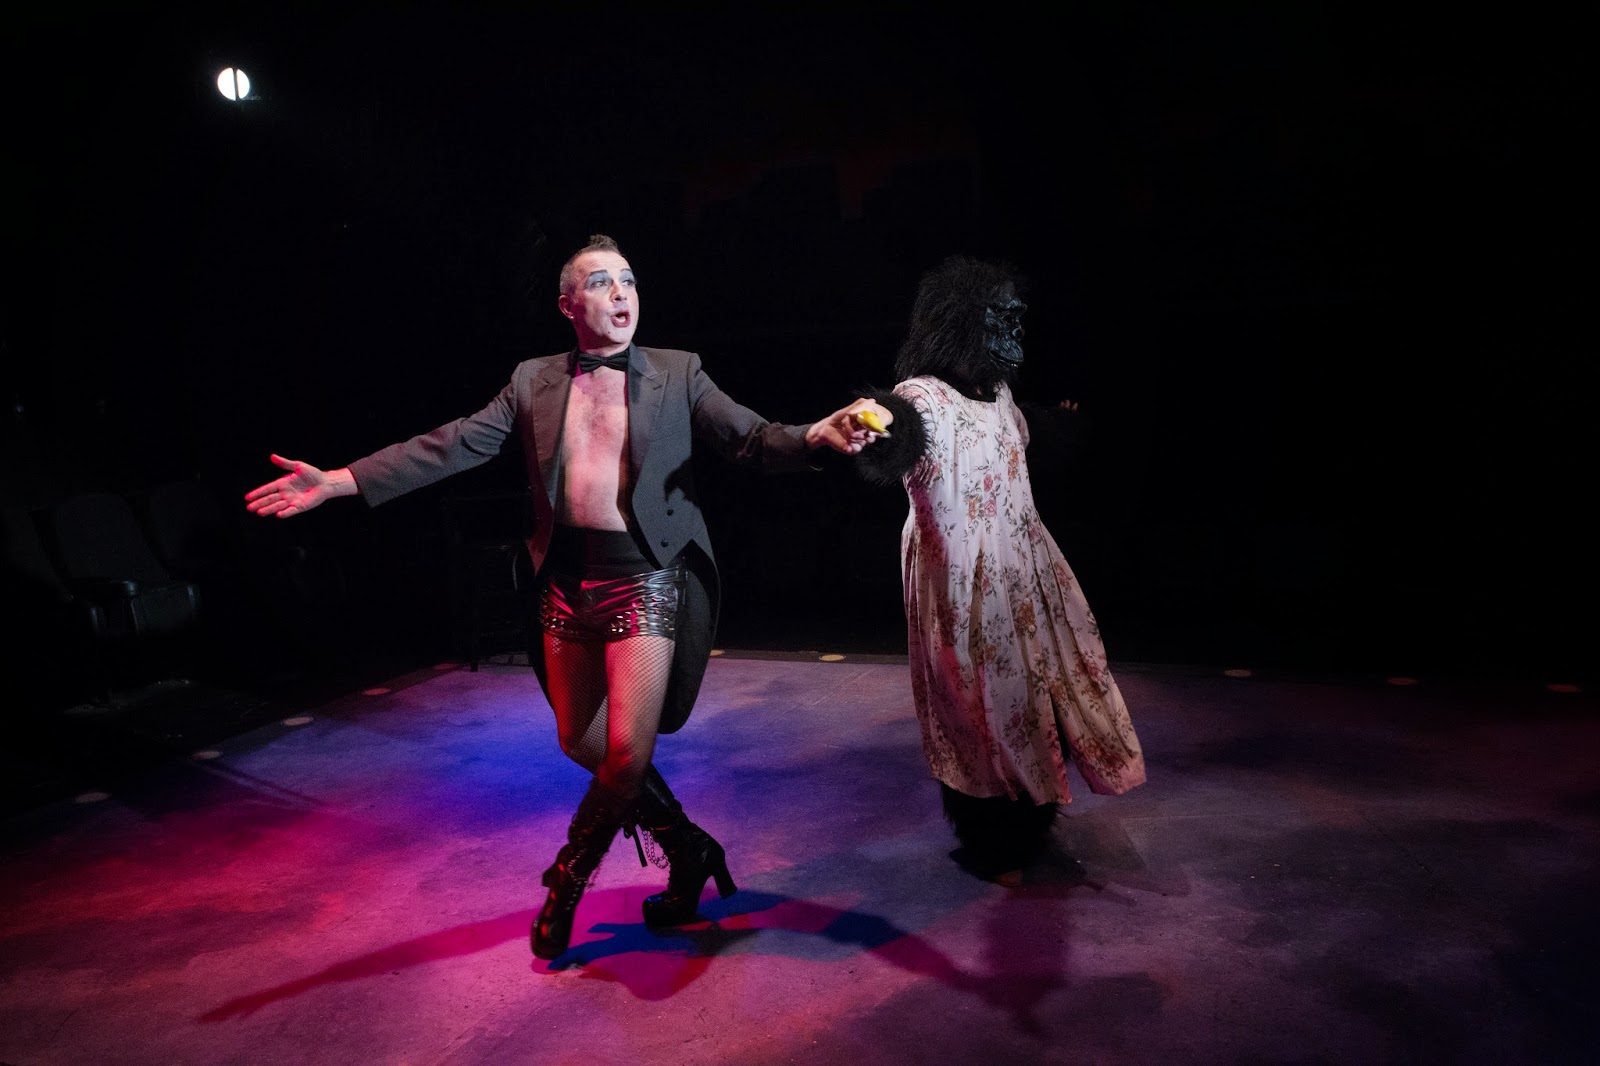 Terry Gadaire. Marna McLendon. Cabaret. 2014. Desert Stages Theatre. Photo by Heather Butcher.